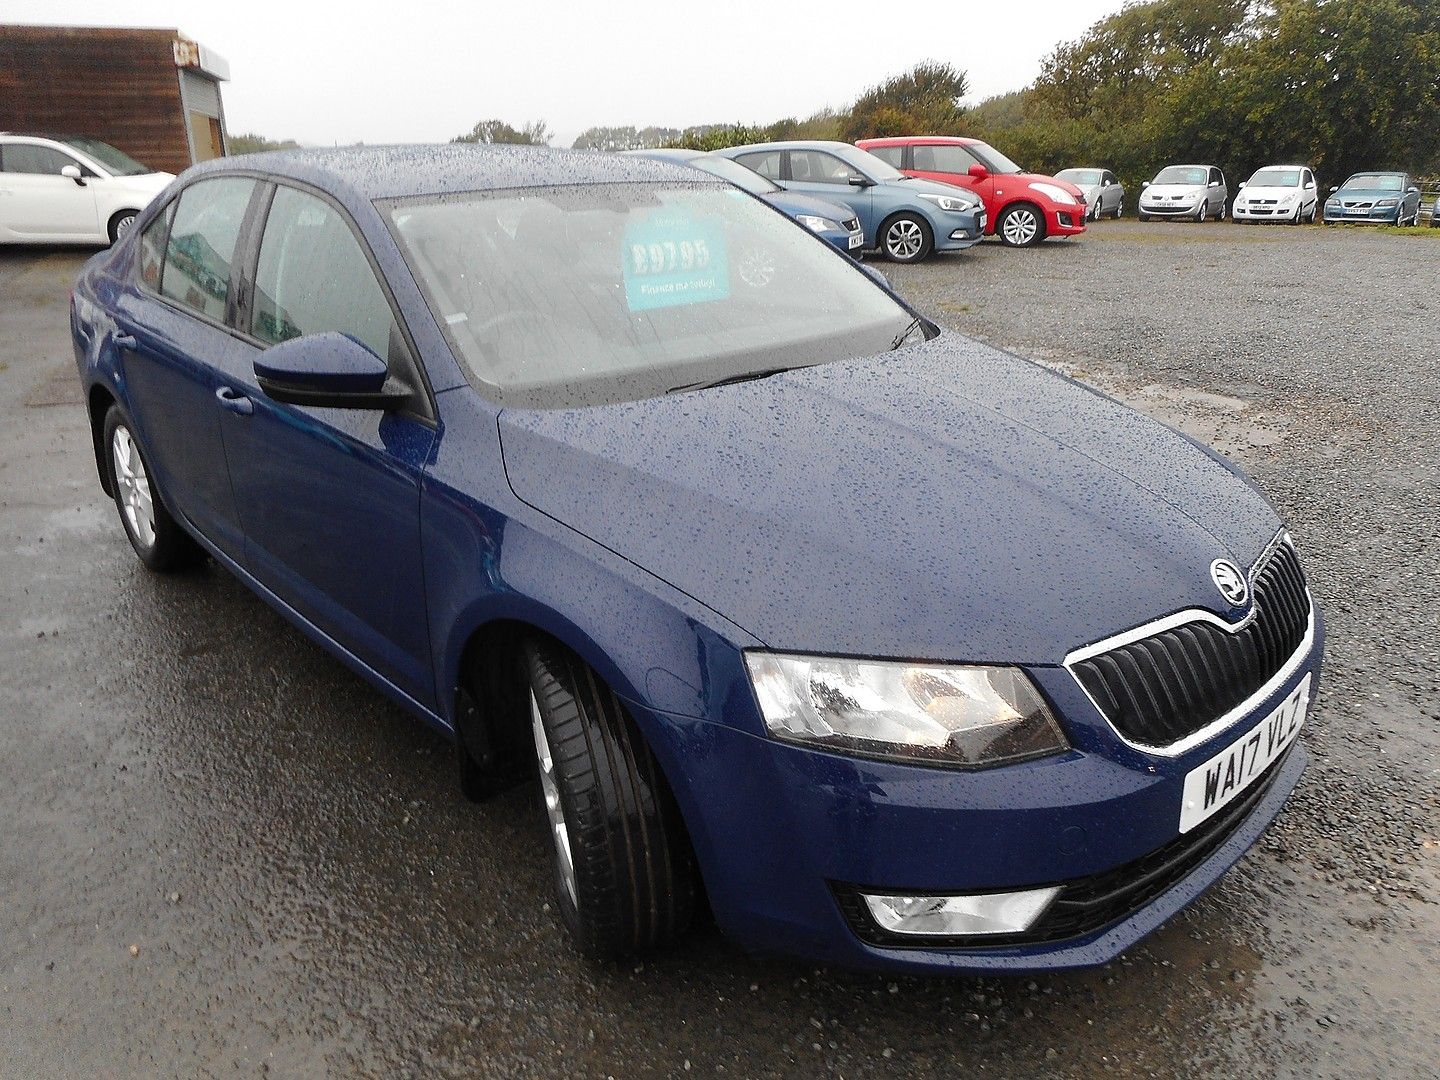 SKODAOctaviaSE 1.0 TSI 115PS for sale